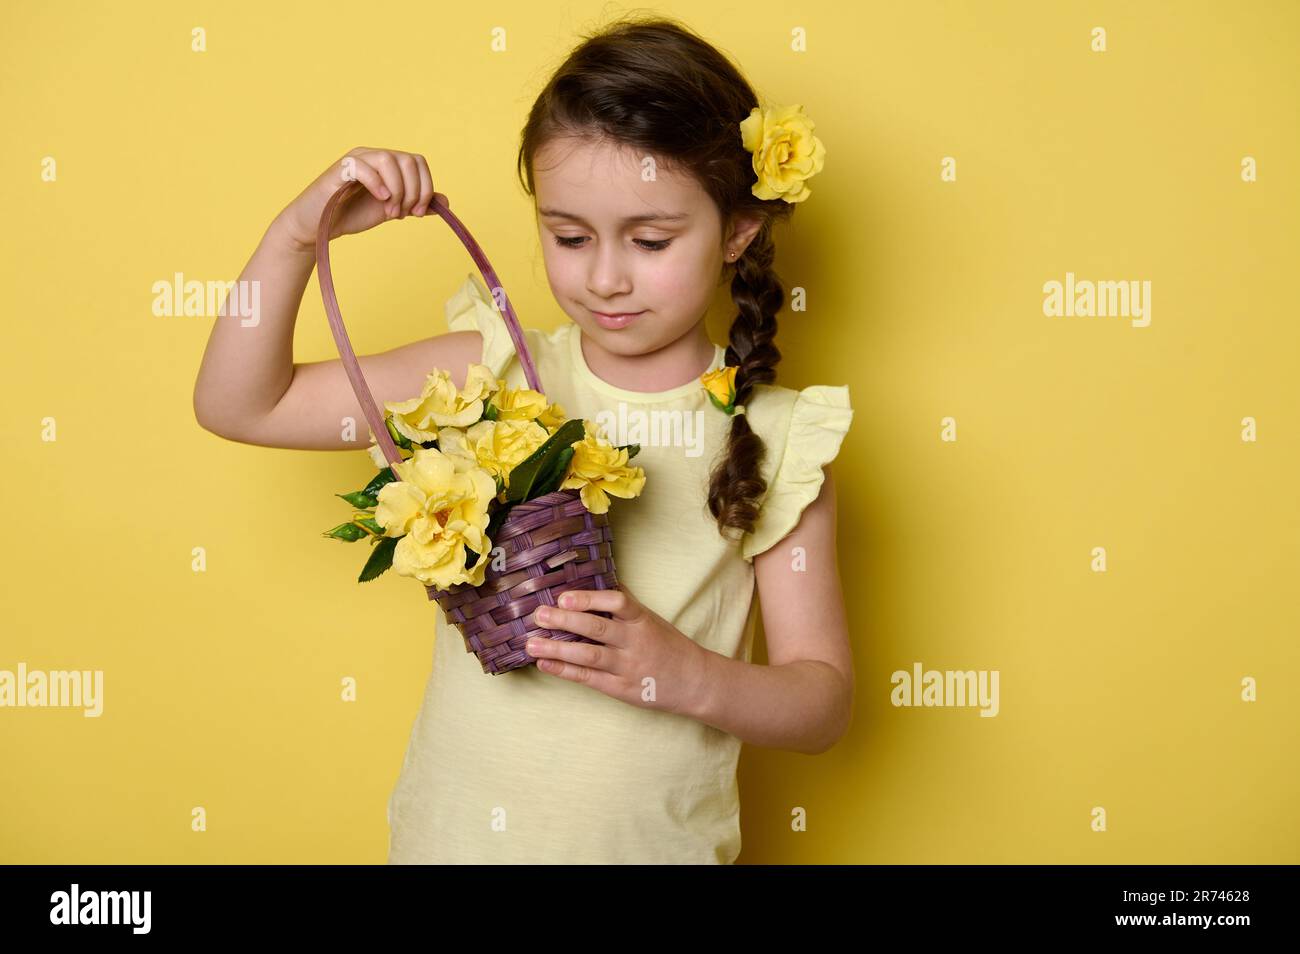 Cute little girl with rose flowers in hairstyle, holding purple wicker basket of fresh yellow roses, isolated on yellow Stock Photo